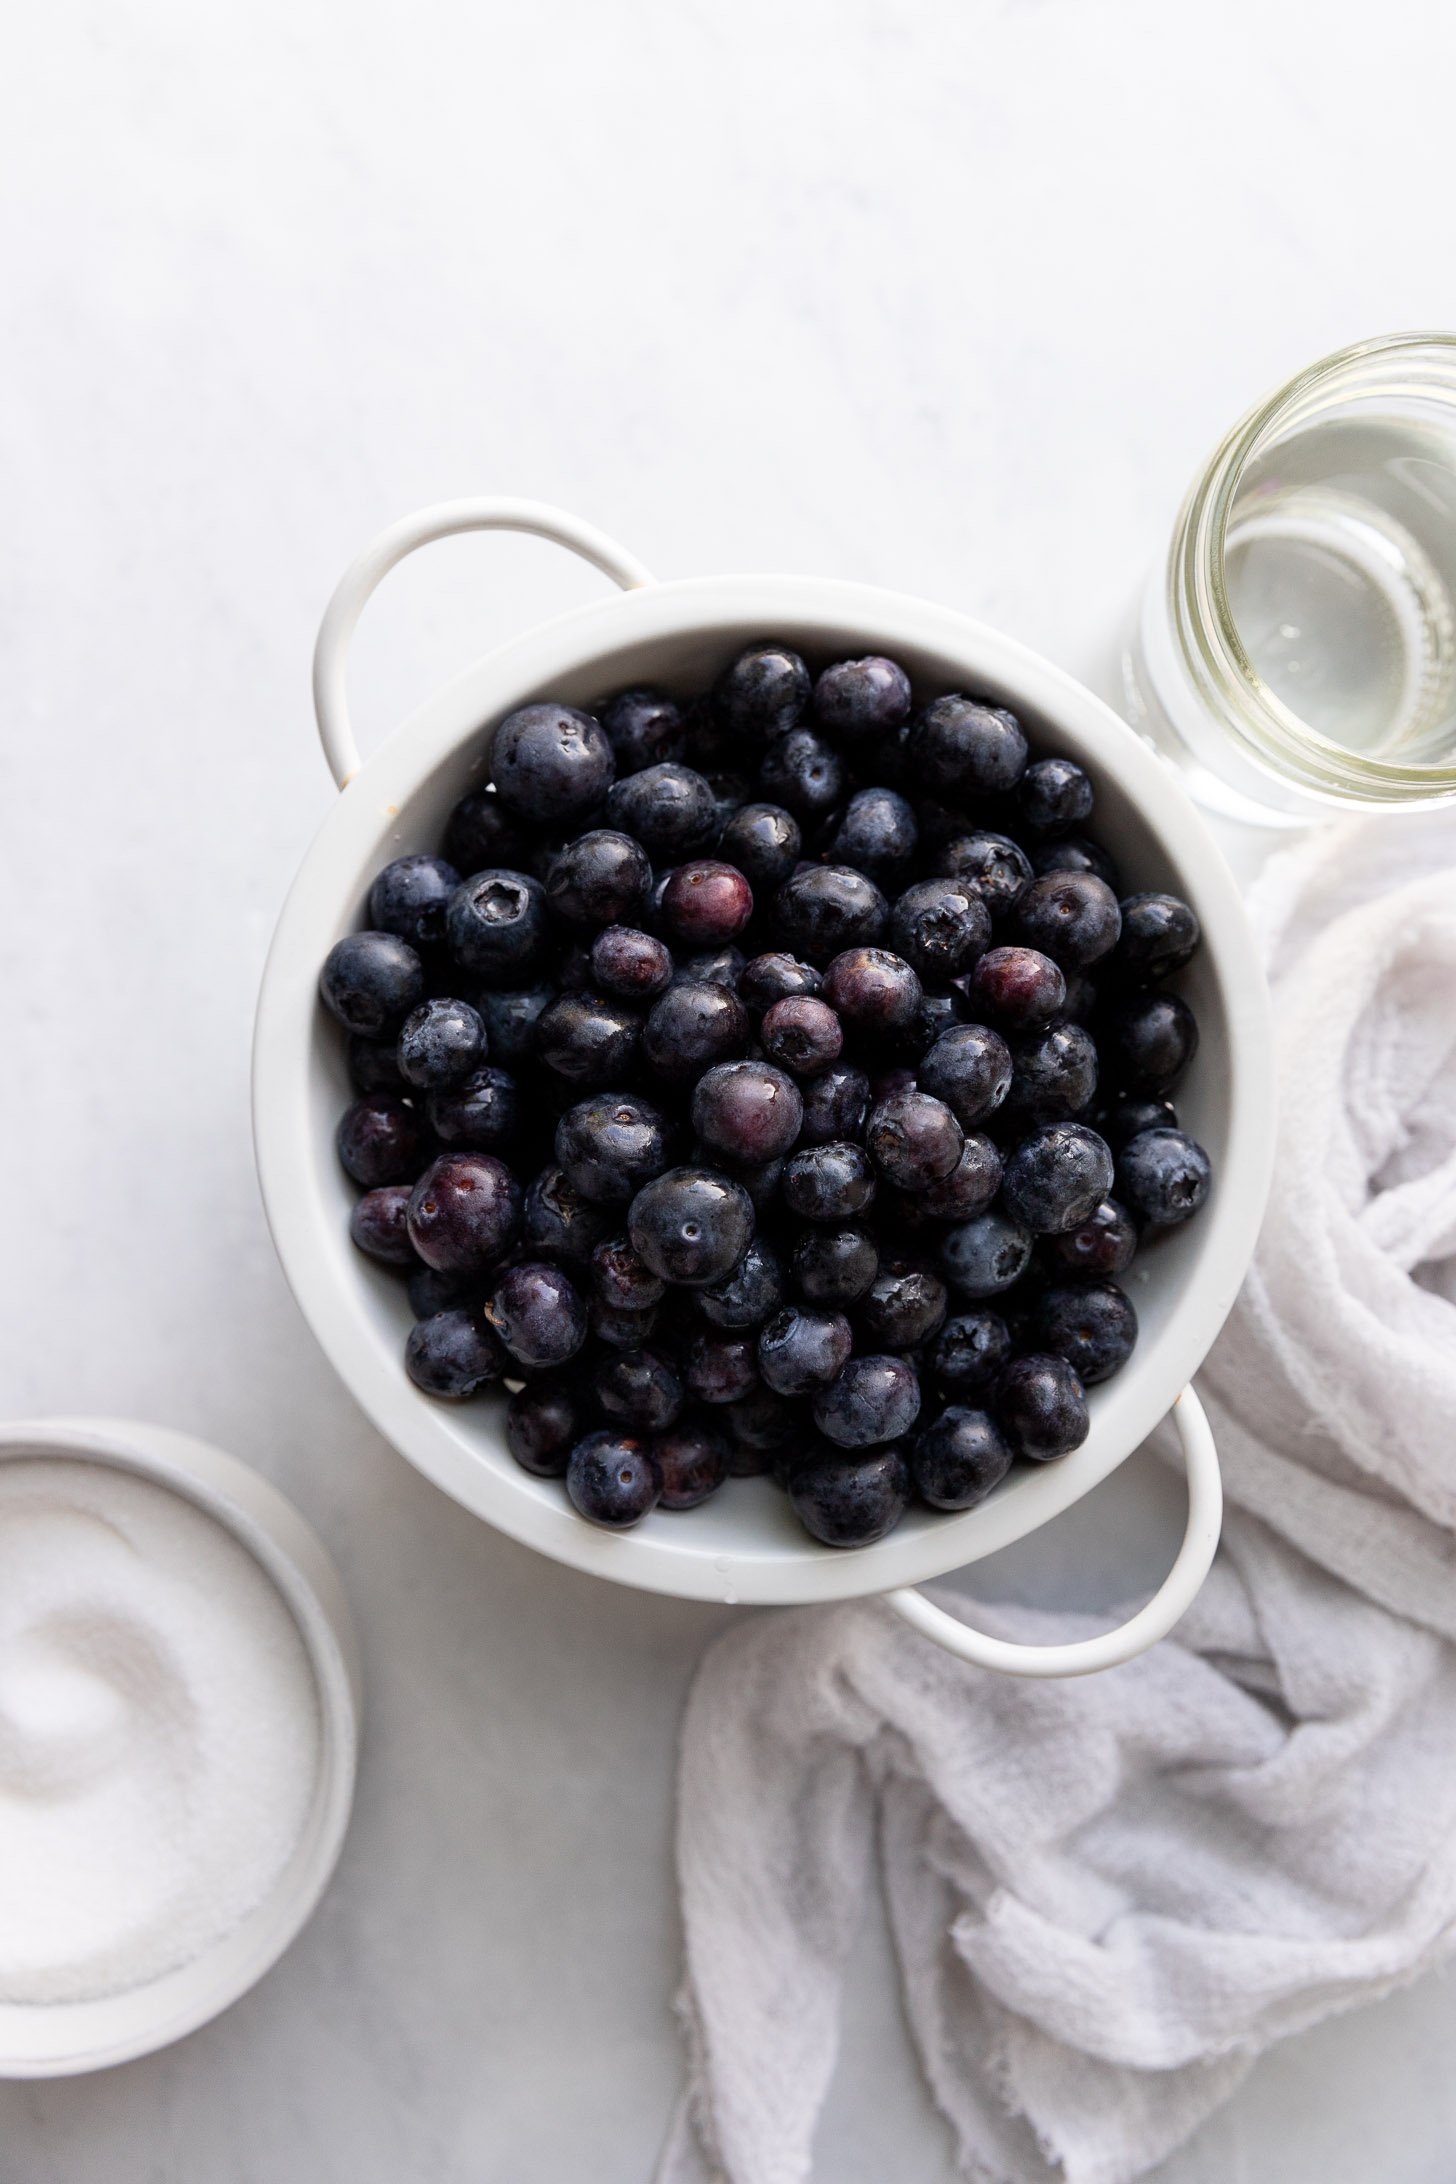 Strainer with blueberries and bowl of sugar.